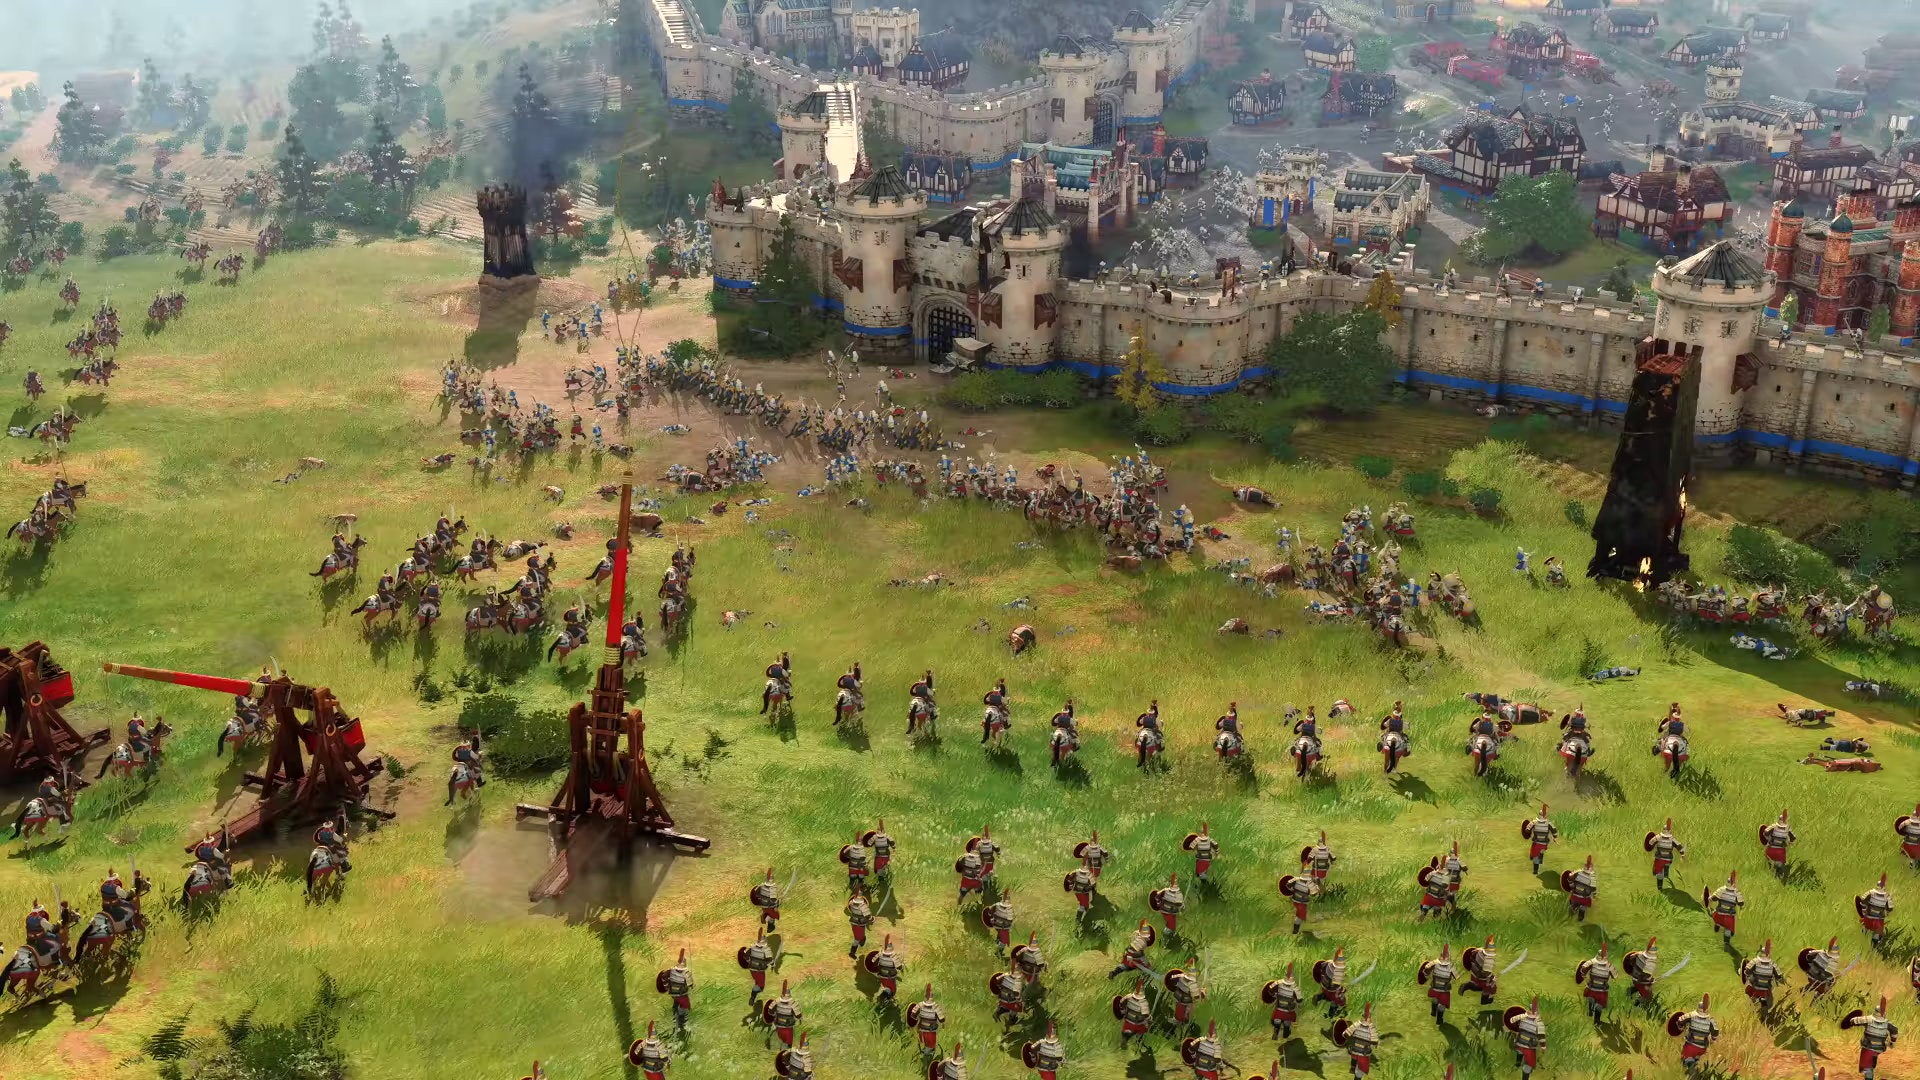 Age Of Empires 4 trailer shows off its medieval setting | Rock Paper